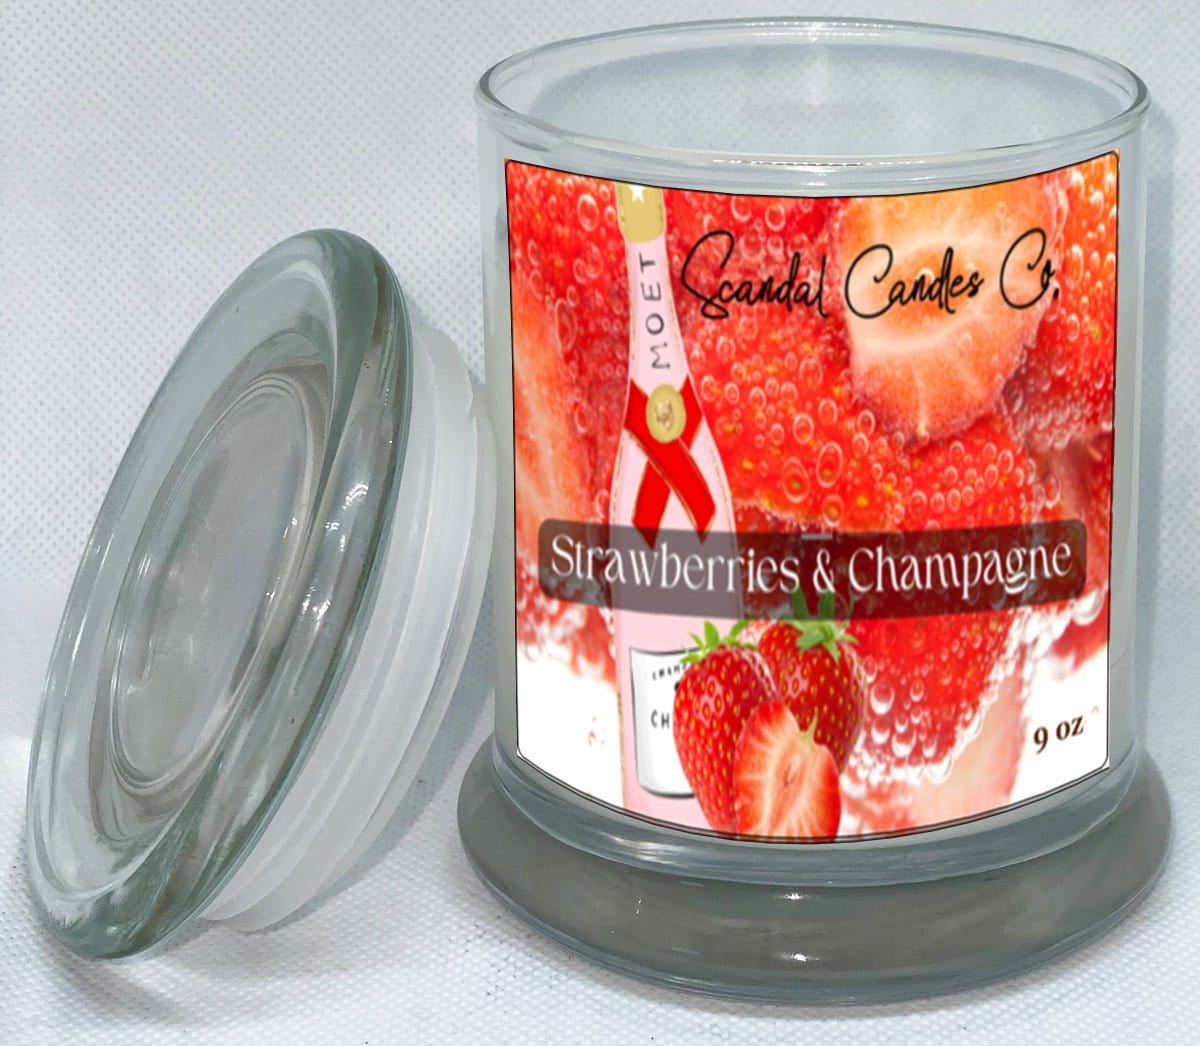 Strawberries & Champagne - Scandal Candles Co.